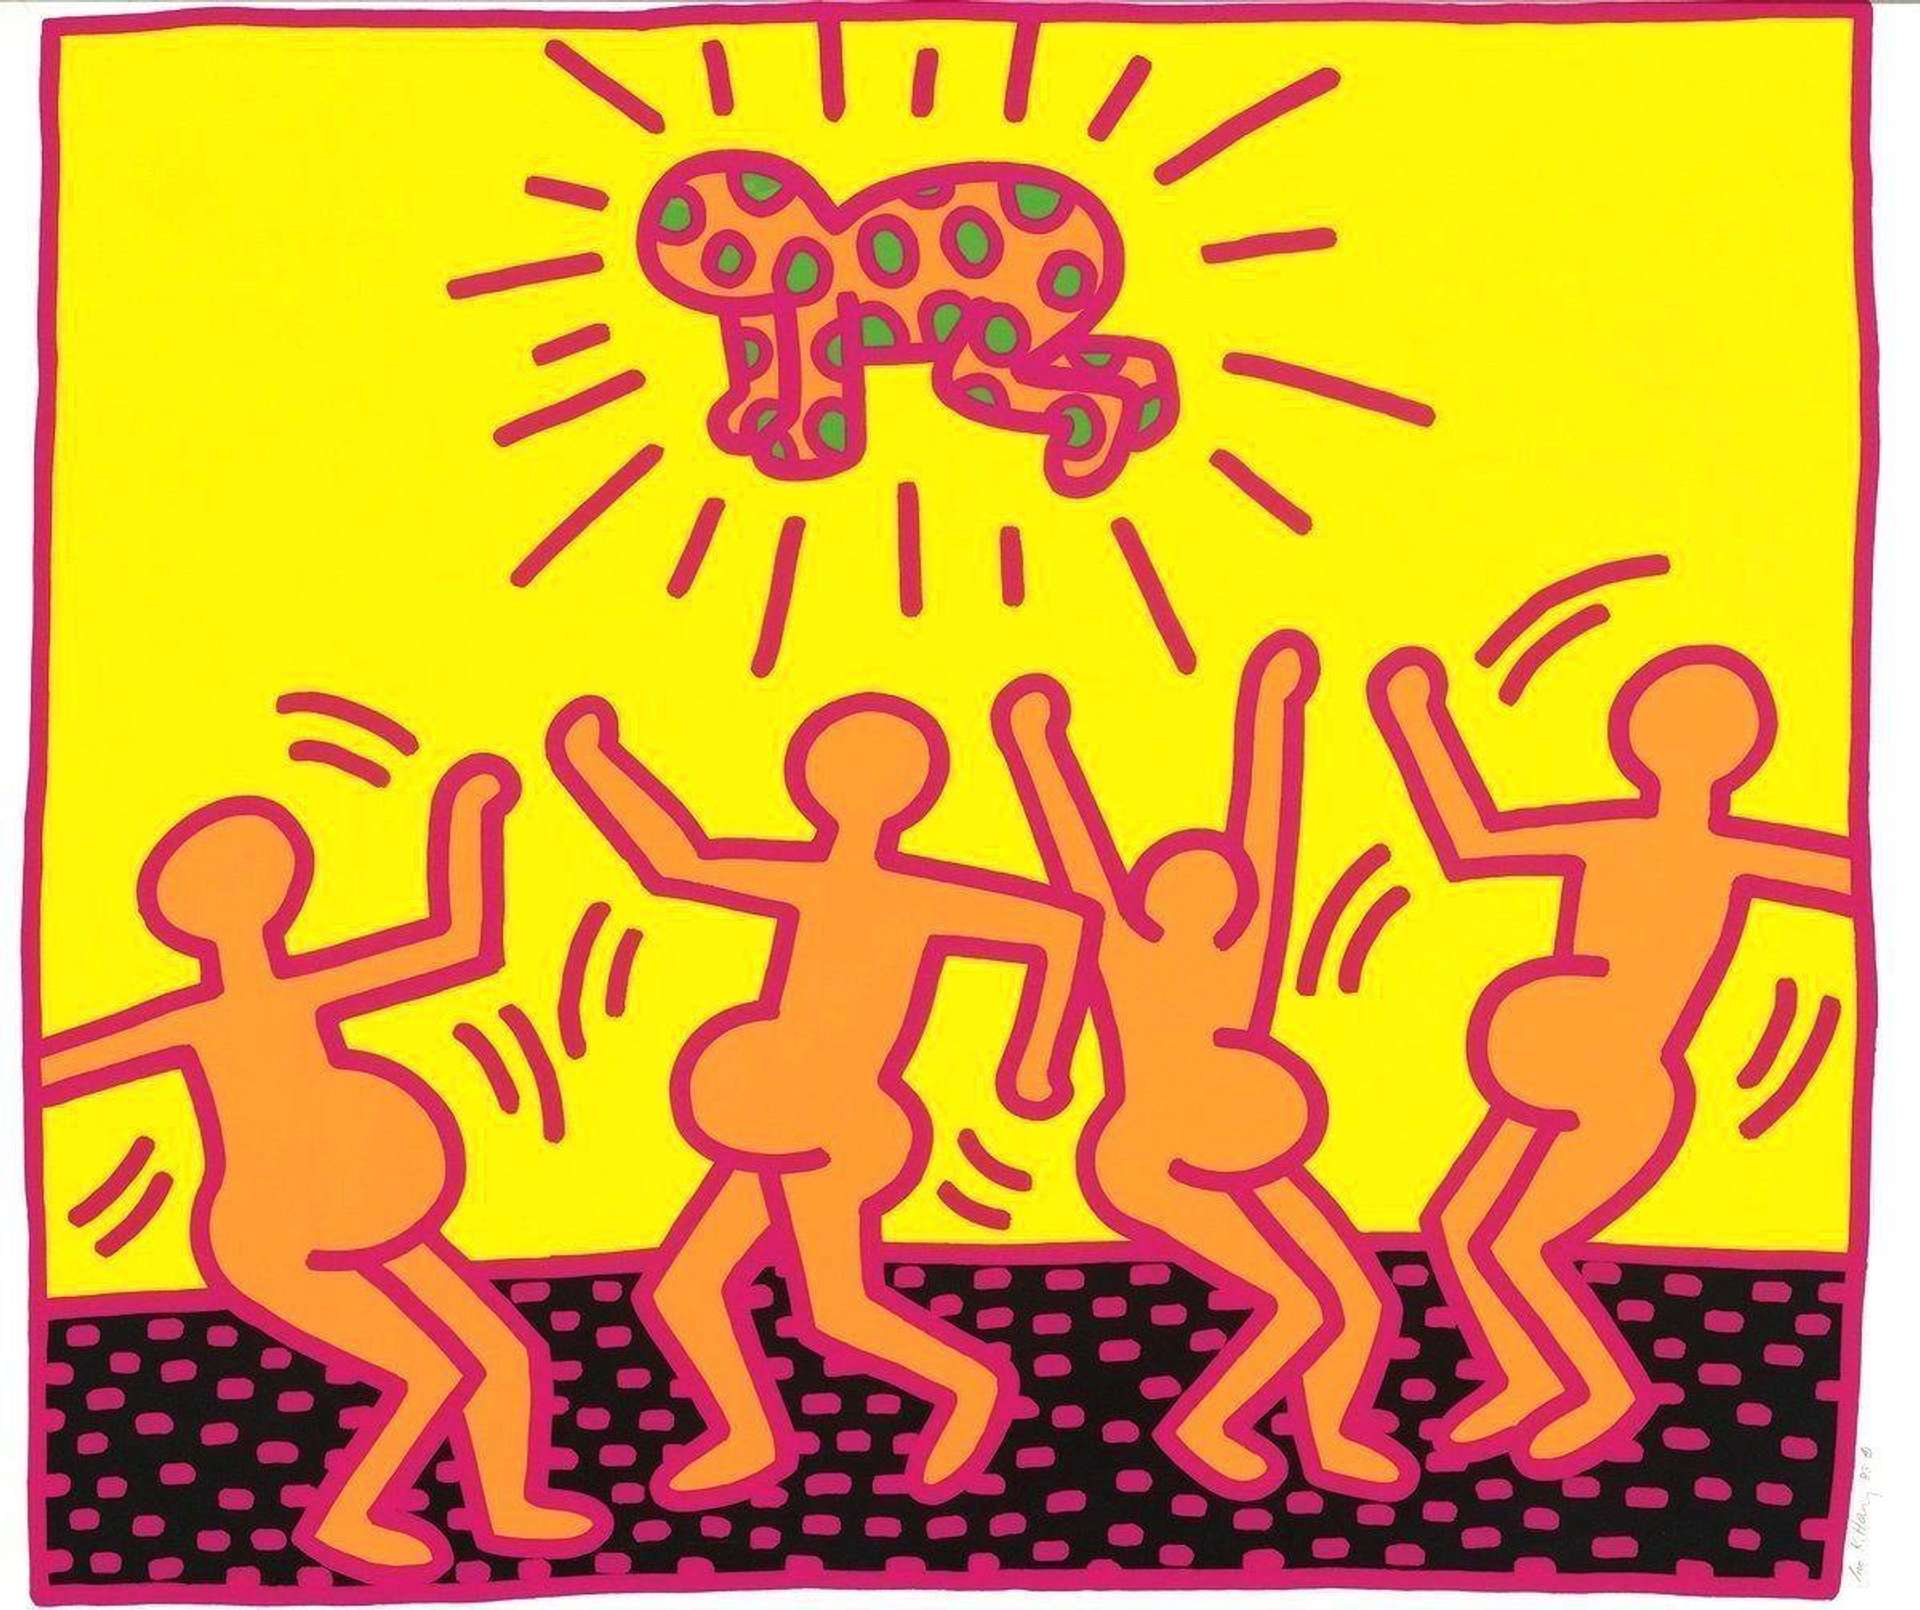 Fertility 1 by Keith Haring.  On a yellow background, the image shows four pregnant figures dancing below a baby apparition.